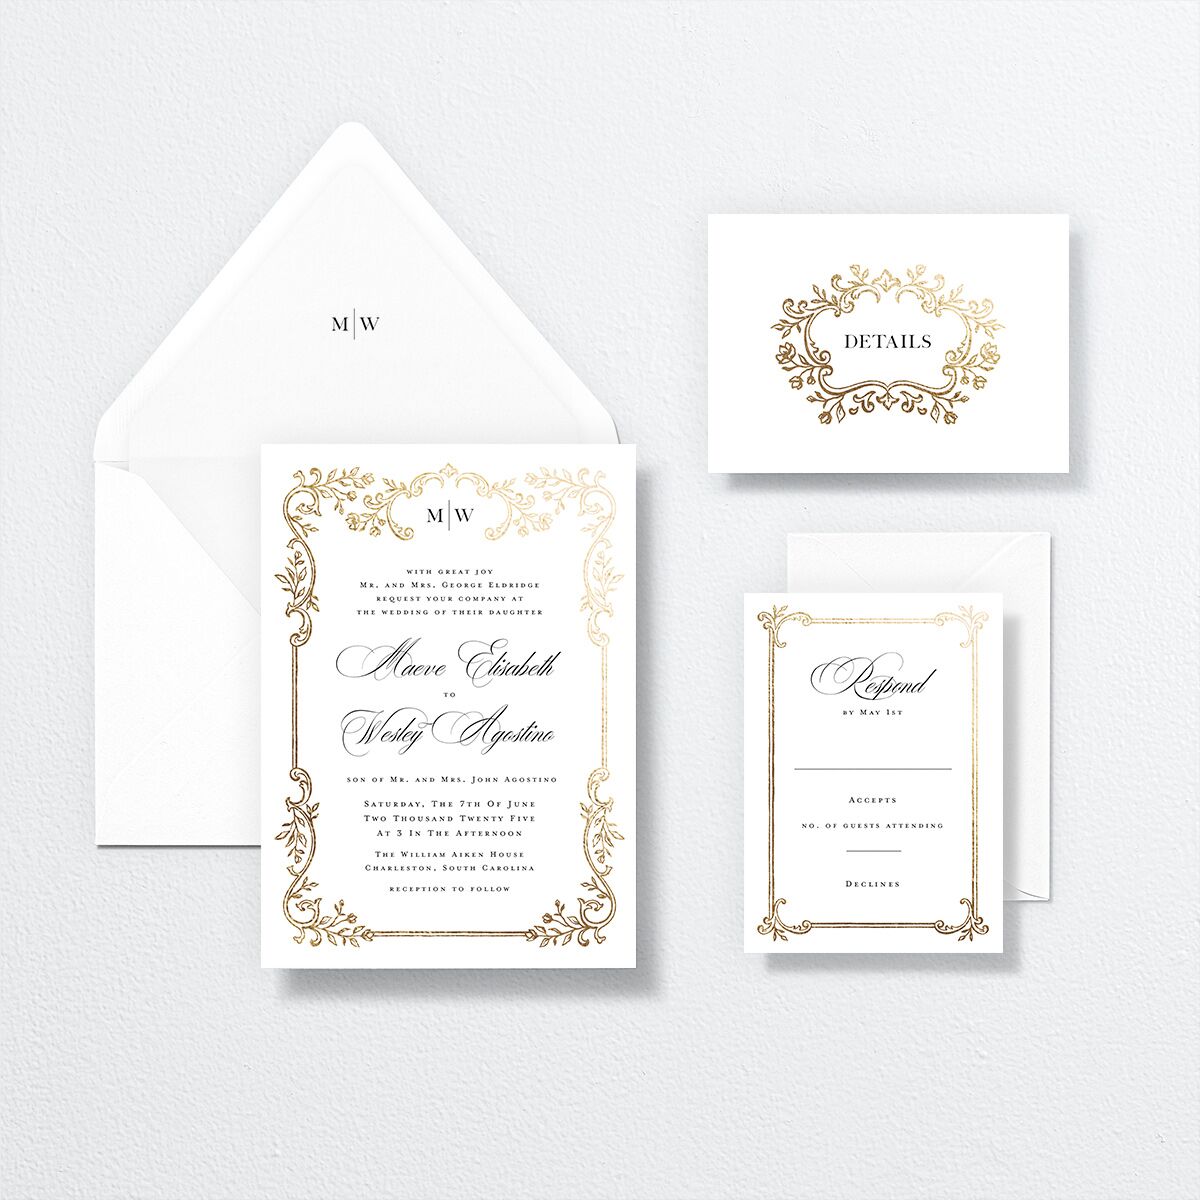 Opulences Wedding Invitations by Vera Wang suite in white